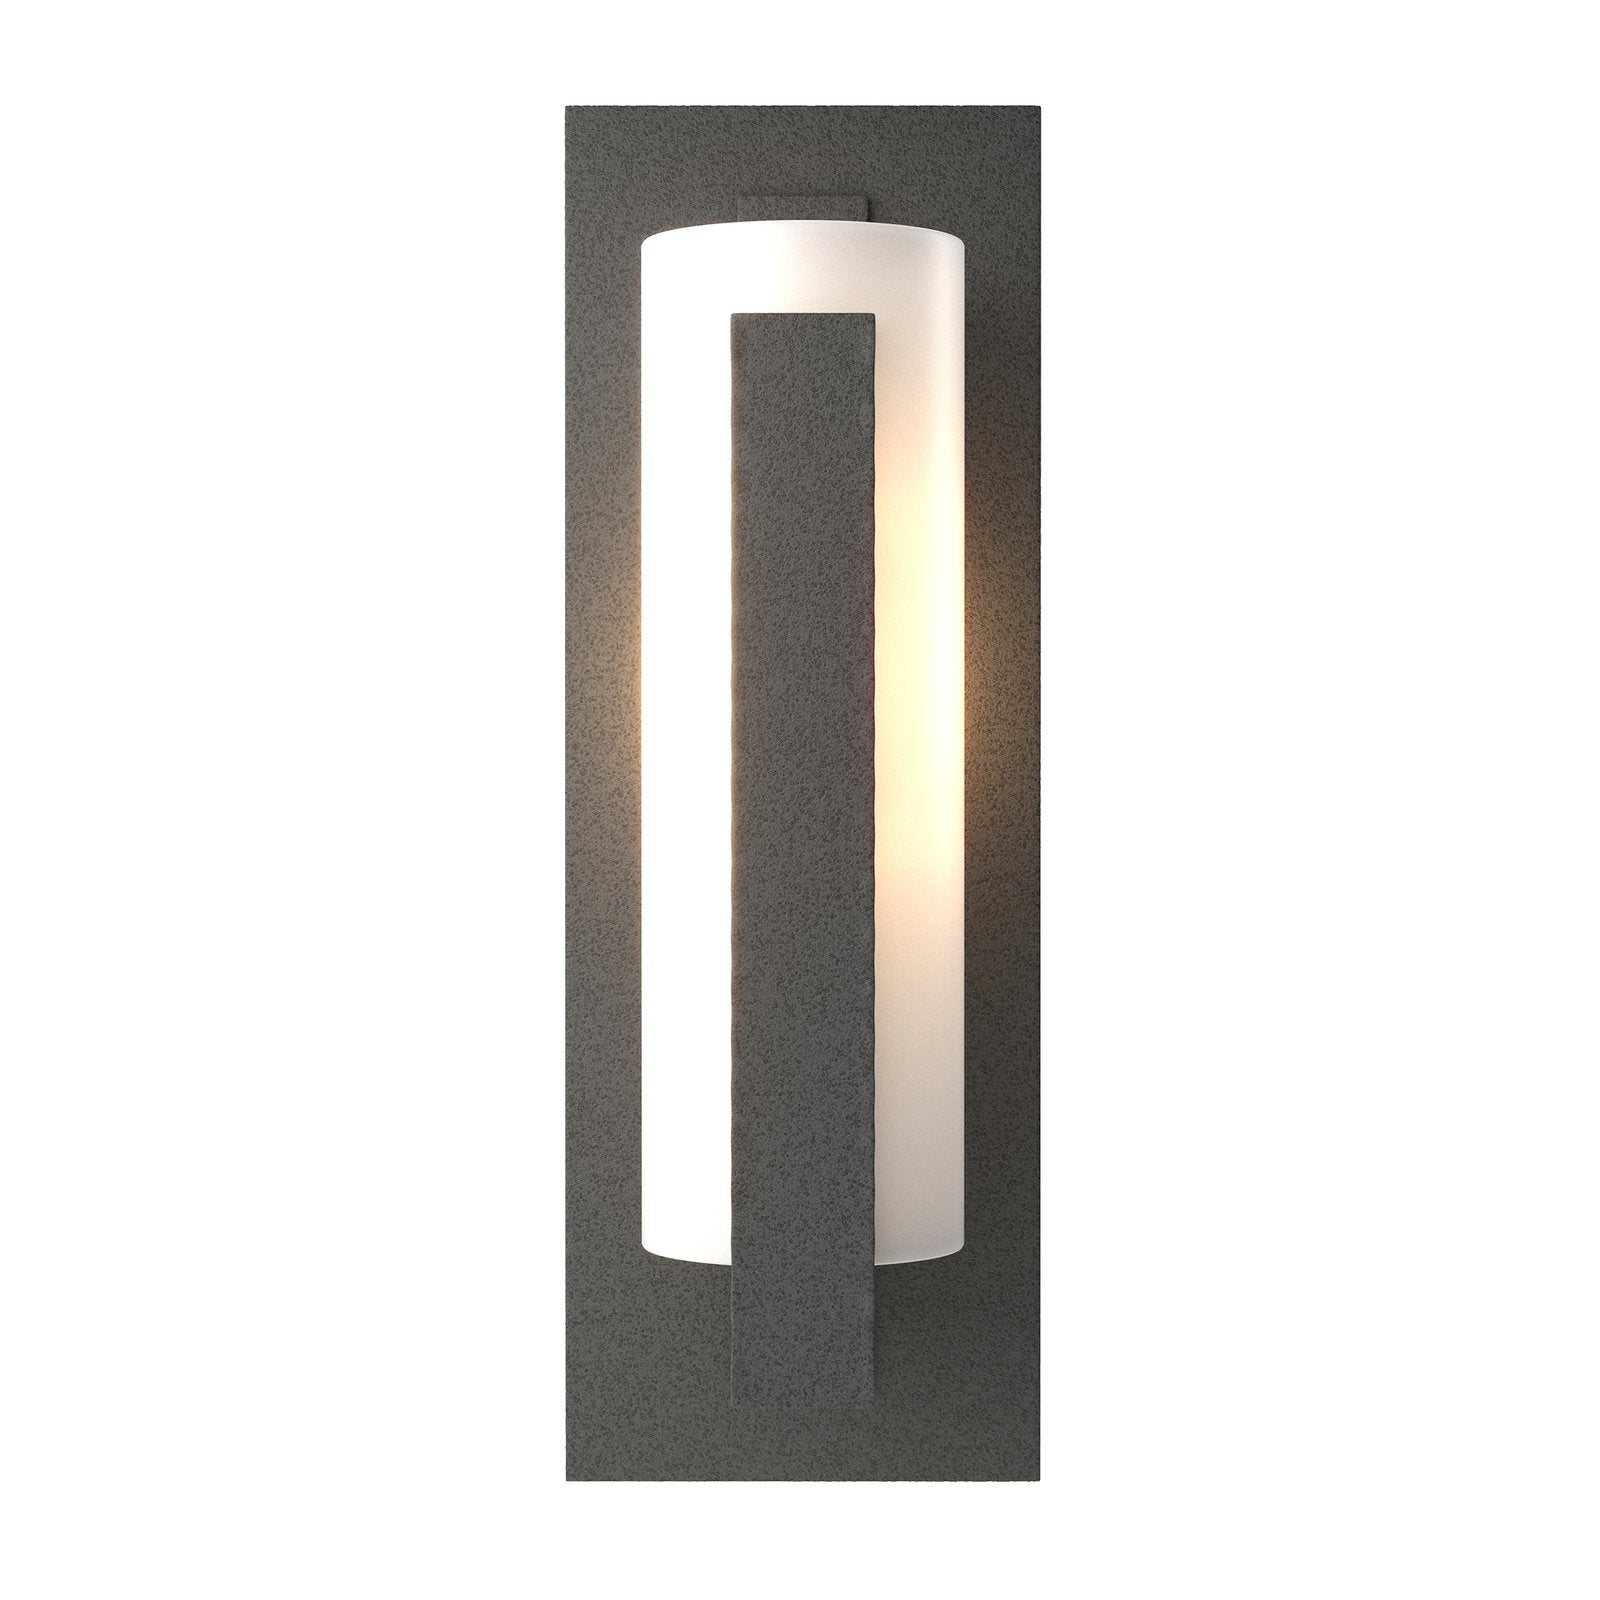 Hubbardton Forge Forged Vertical Bars Outdoor Sconce Outdoor l Wall Hubbardton Forge Coastal Natural Iron Opal Glass (GG) 